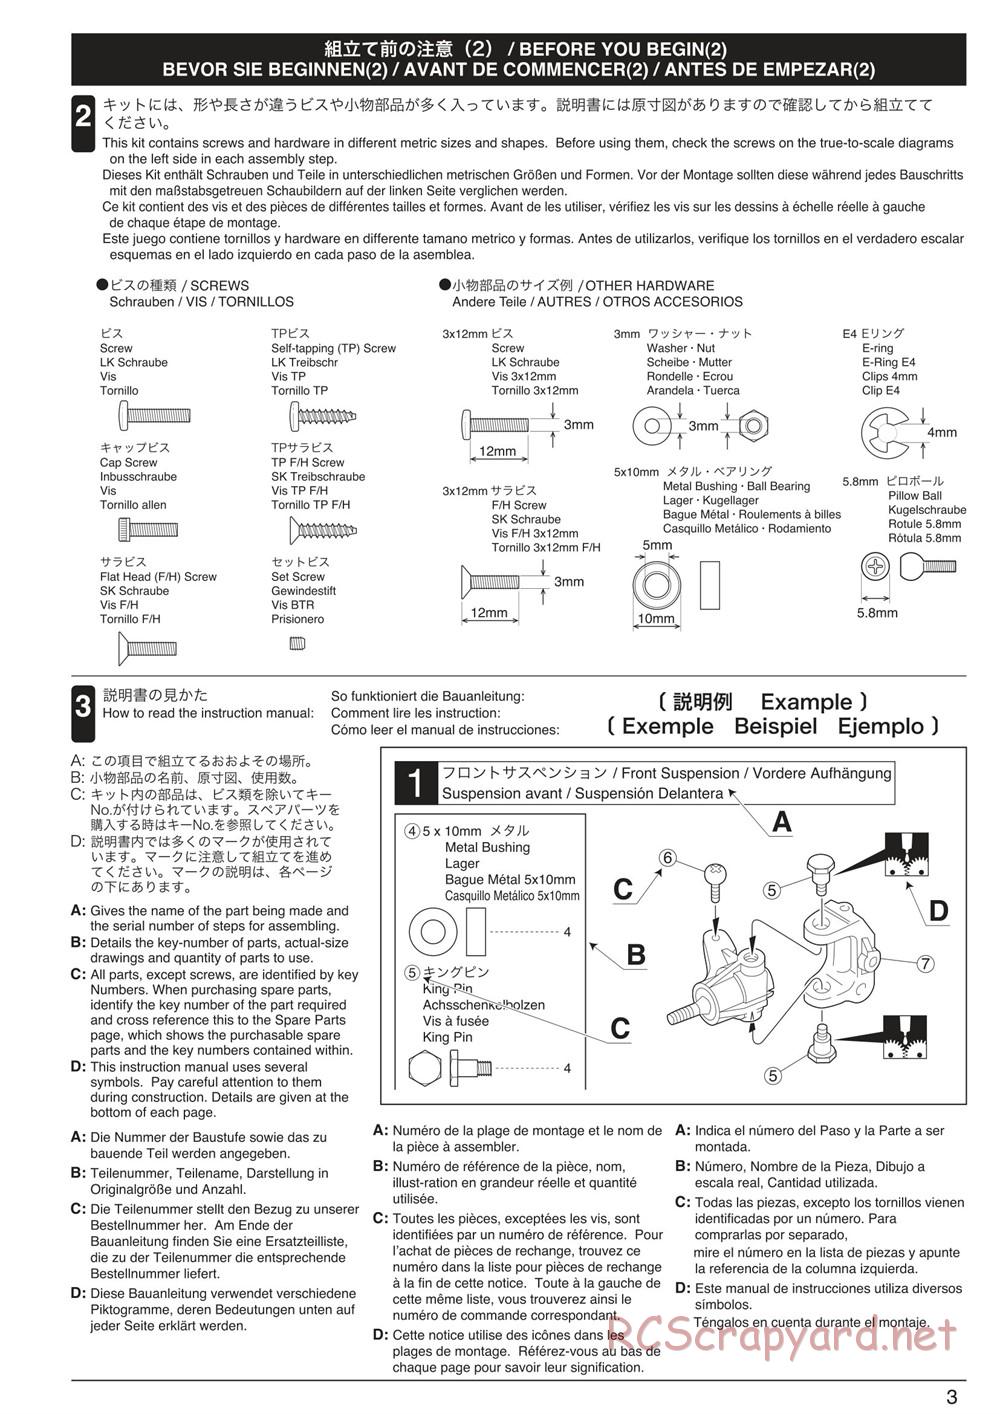 Kyosho - Mad Crusher VE - Manual - Page 3